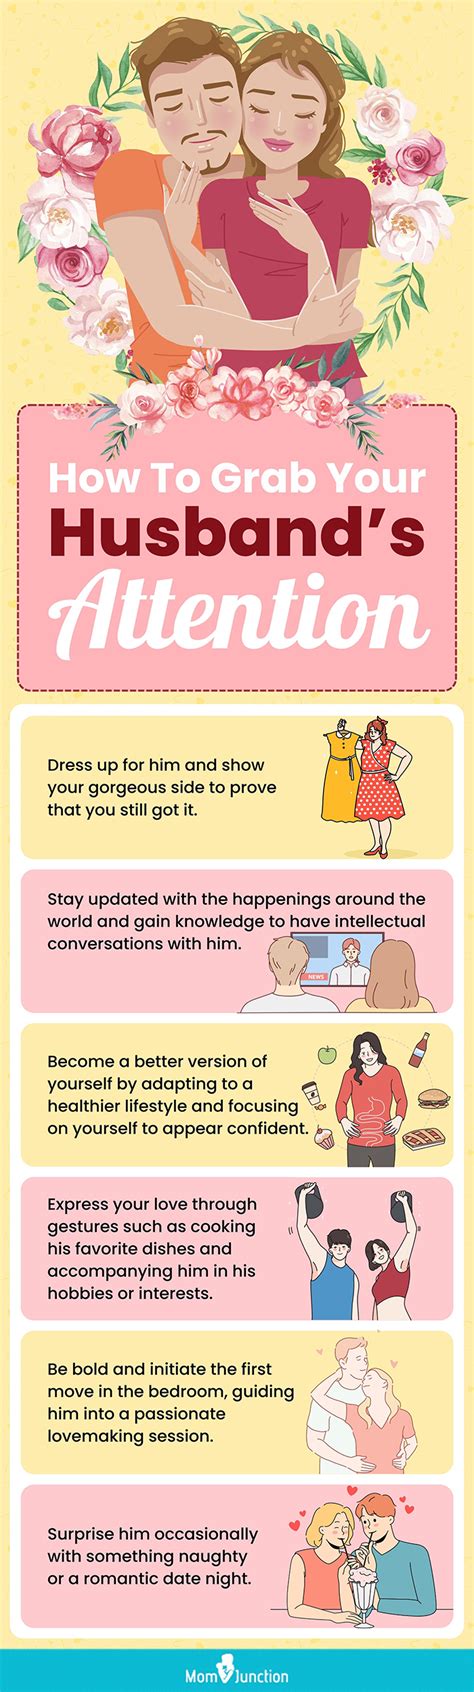 How To Impress Your Husband 14 Tricks To Attract Him All Again